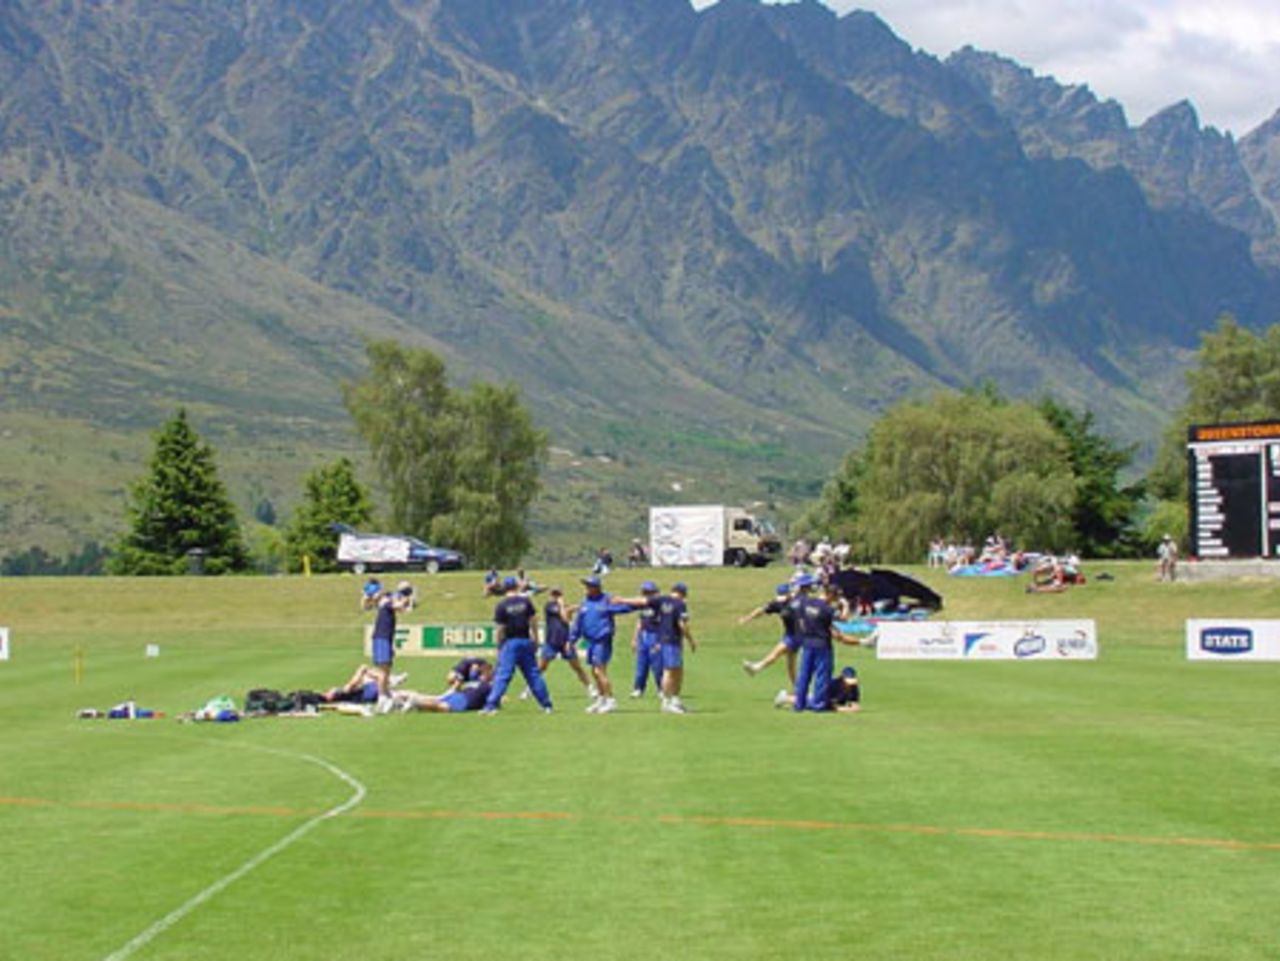 Otago warm up before the start of the first match at the new ground. State Shield: Otago v Wellington at John Davies Oval, Queenstown, 2 January 2002.